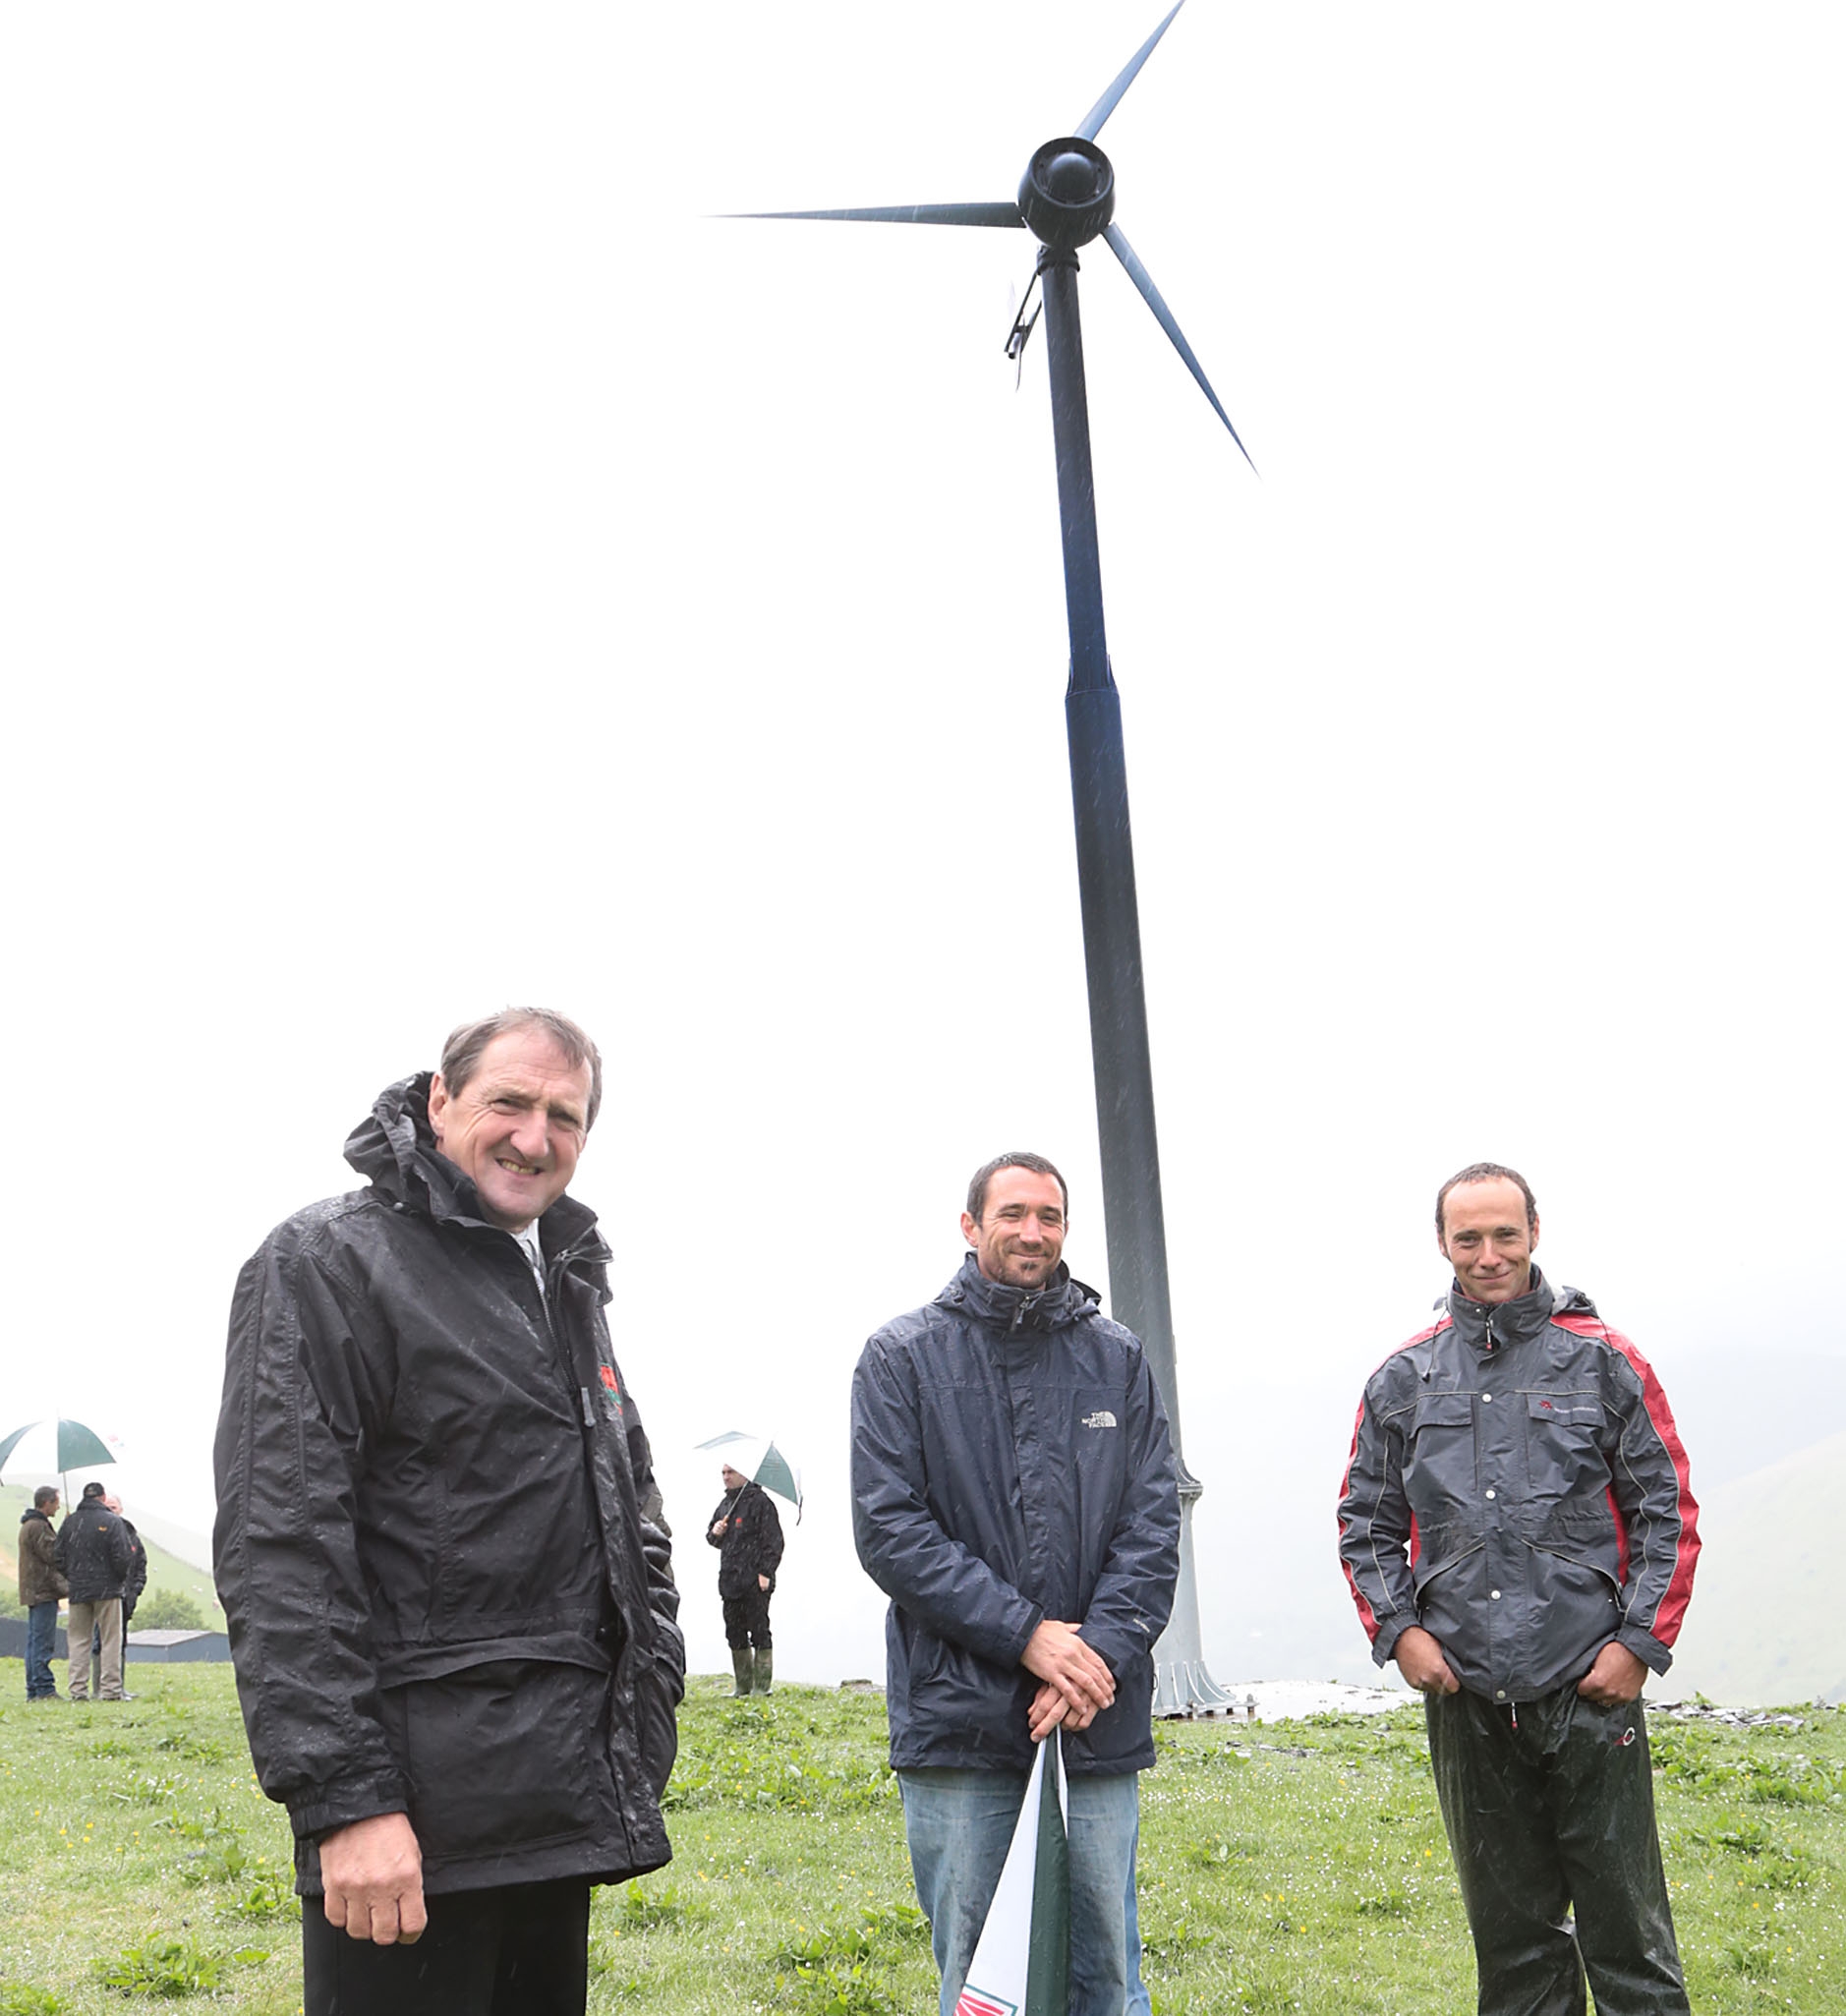 From left, Emyr Jones, Paul Burrell and Dilwyn Pughe at the hilltop location of the wind turbine.